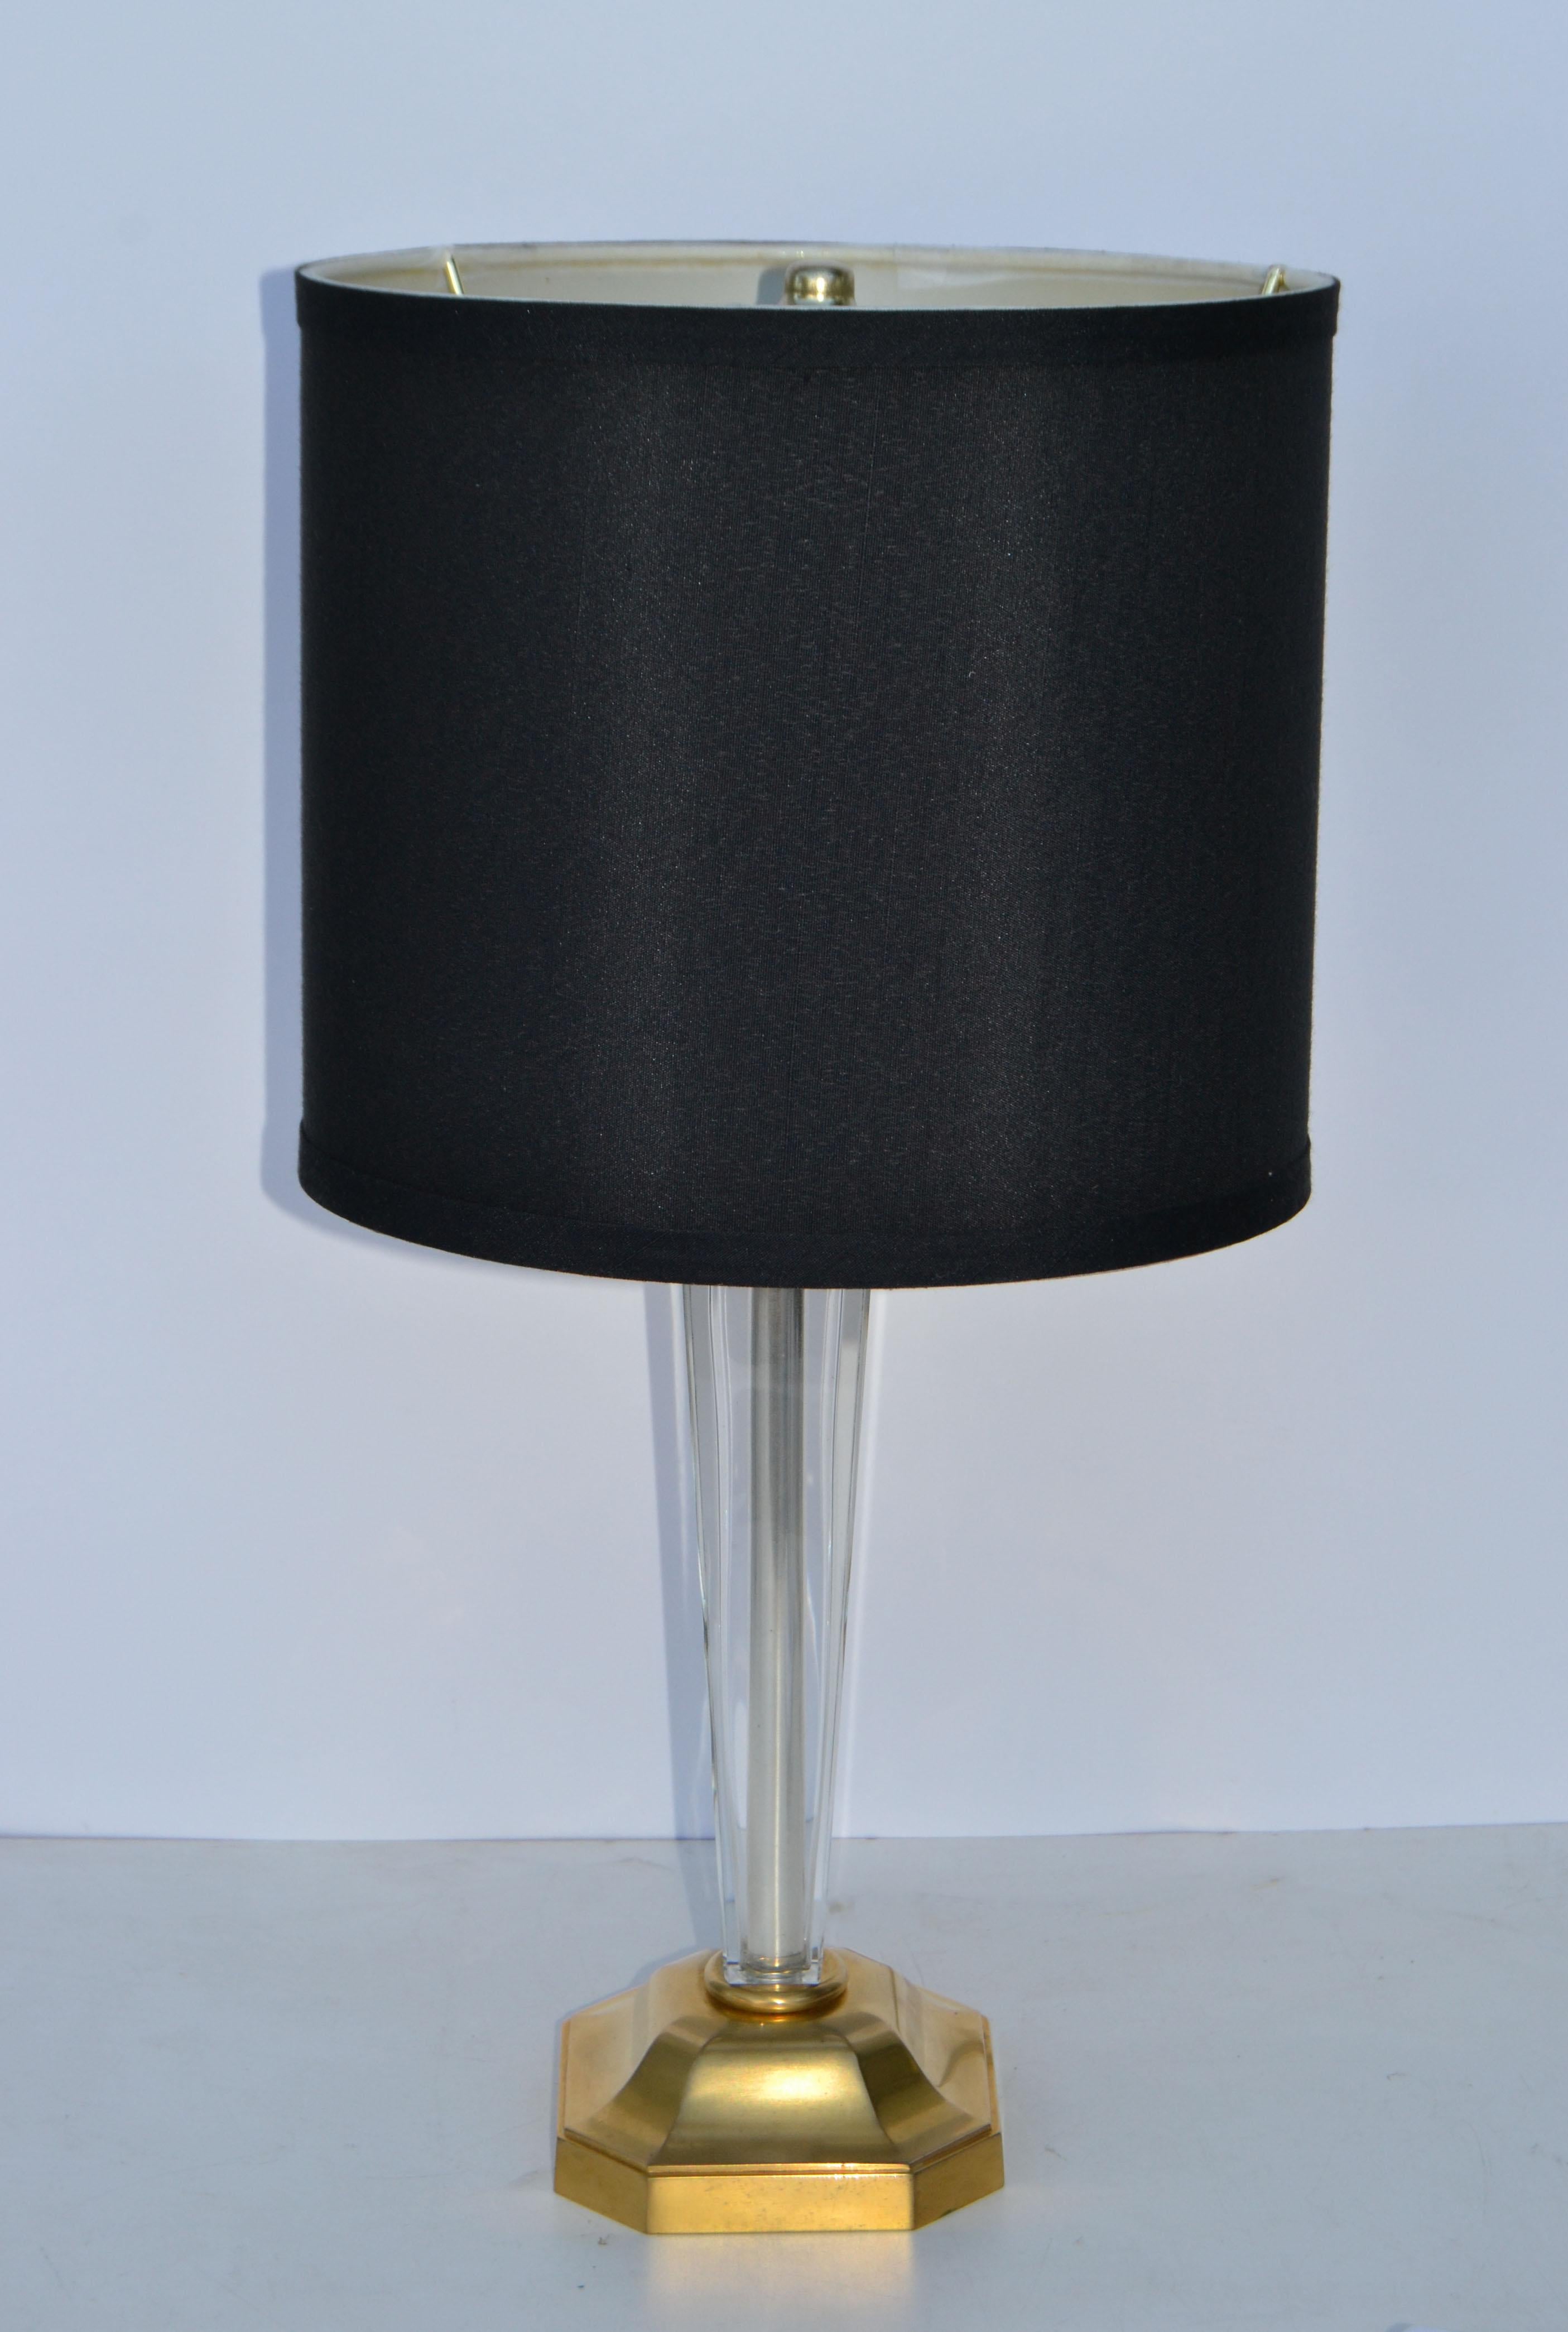 Glass & brass table lamp with clip on harp and black fabric shade neoclassical by Maison Charles, France 1950. 
US Rewiring, lamp takes 1 small candelabra light bulbs with max 60 watts.
Drum shade measures: Diameter: 9 inches, Height: 8